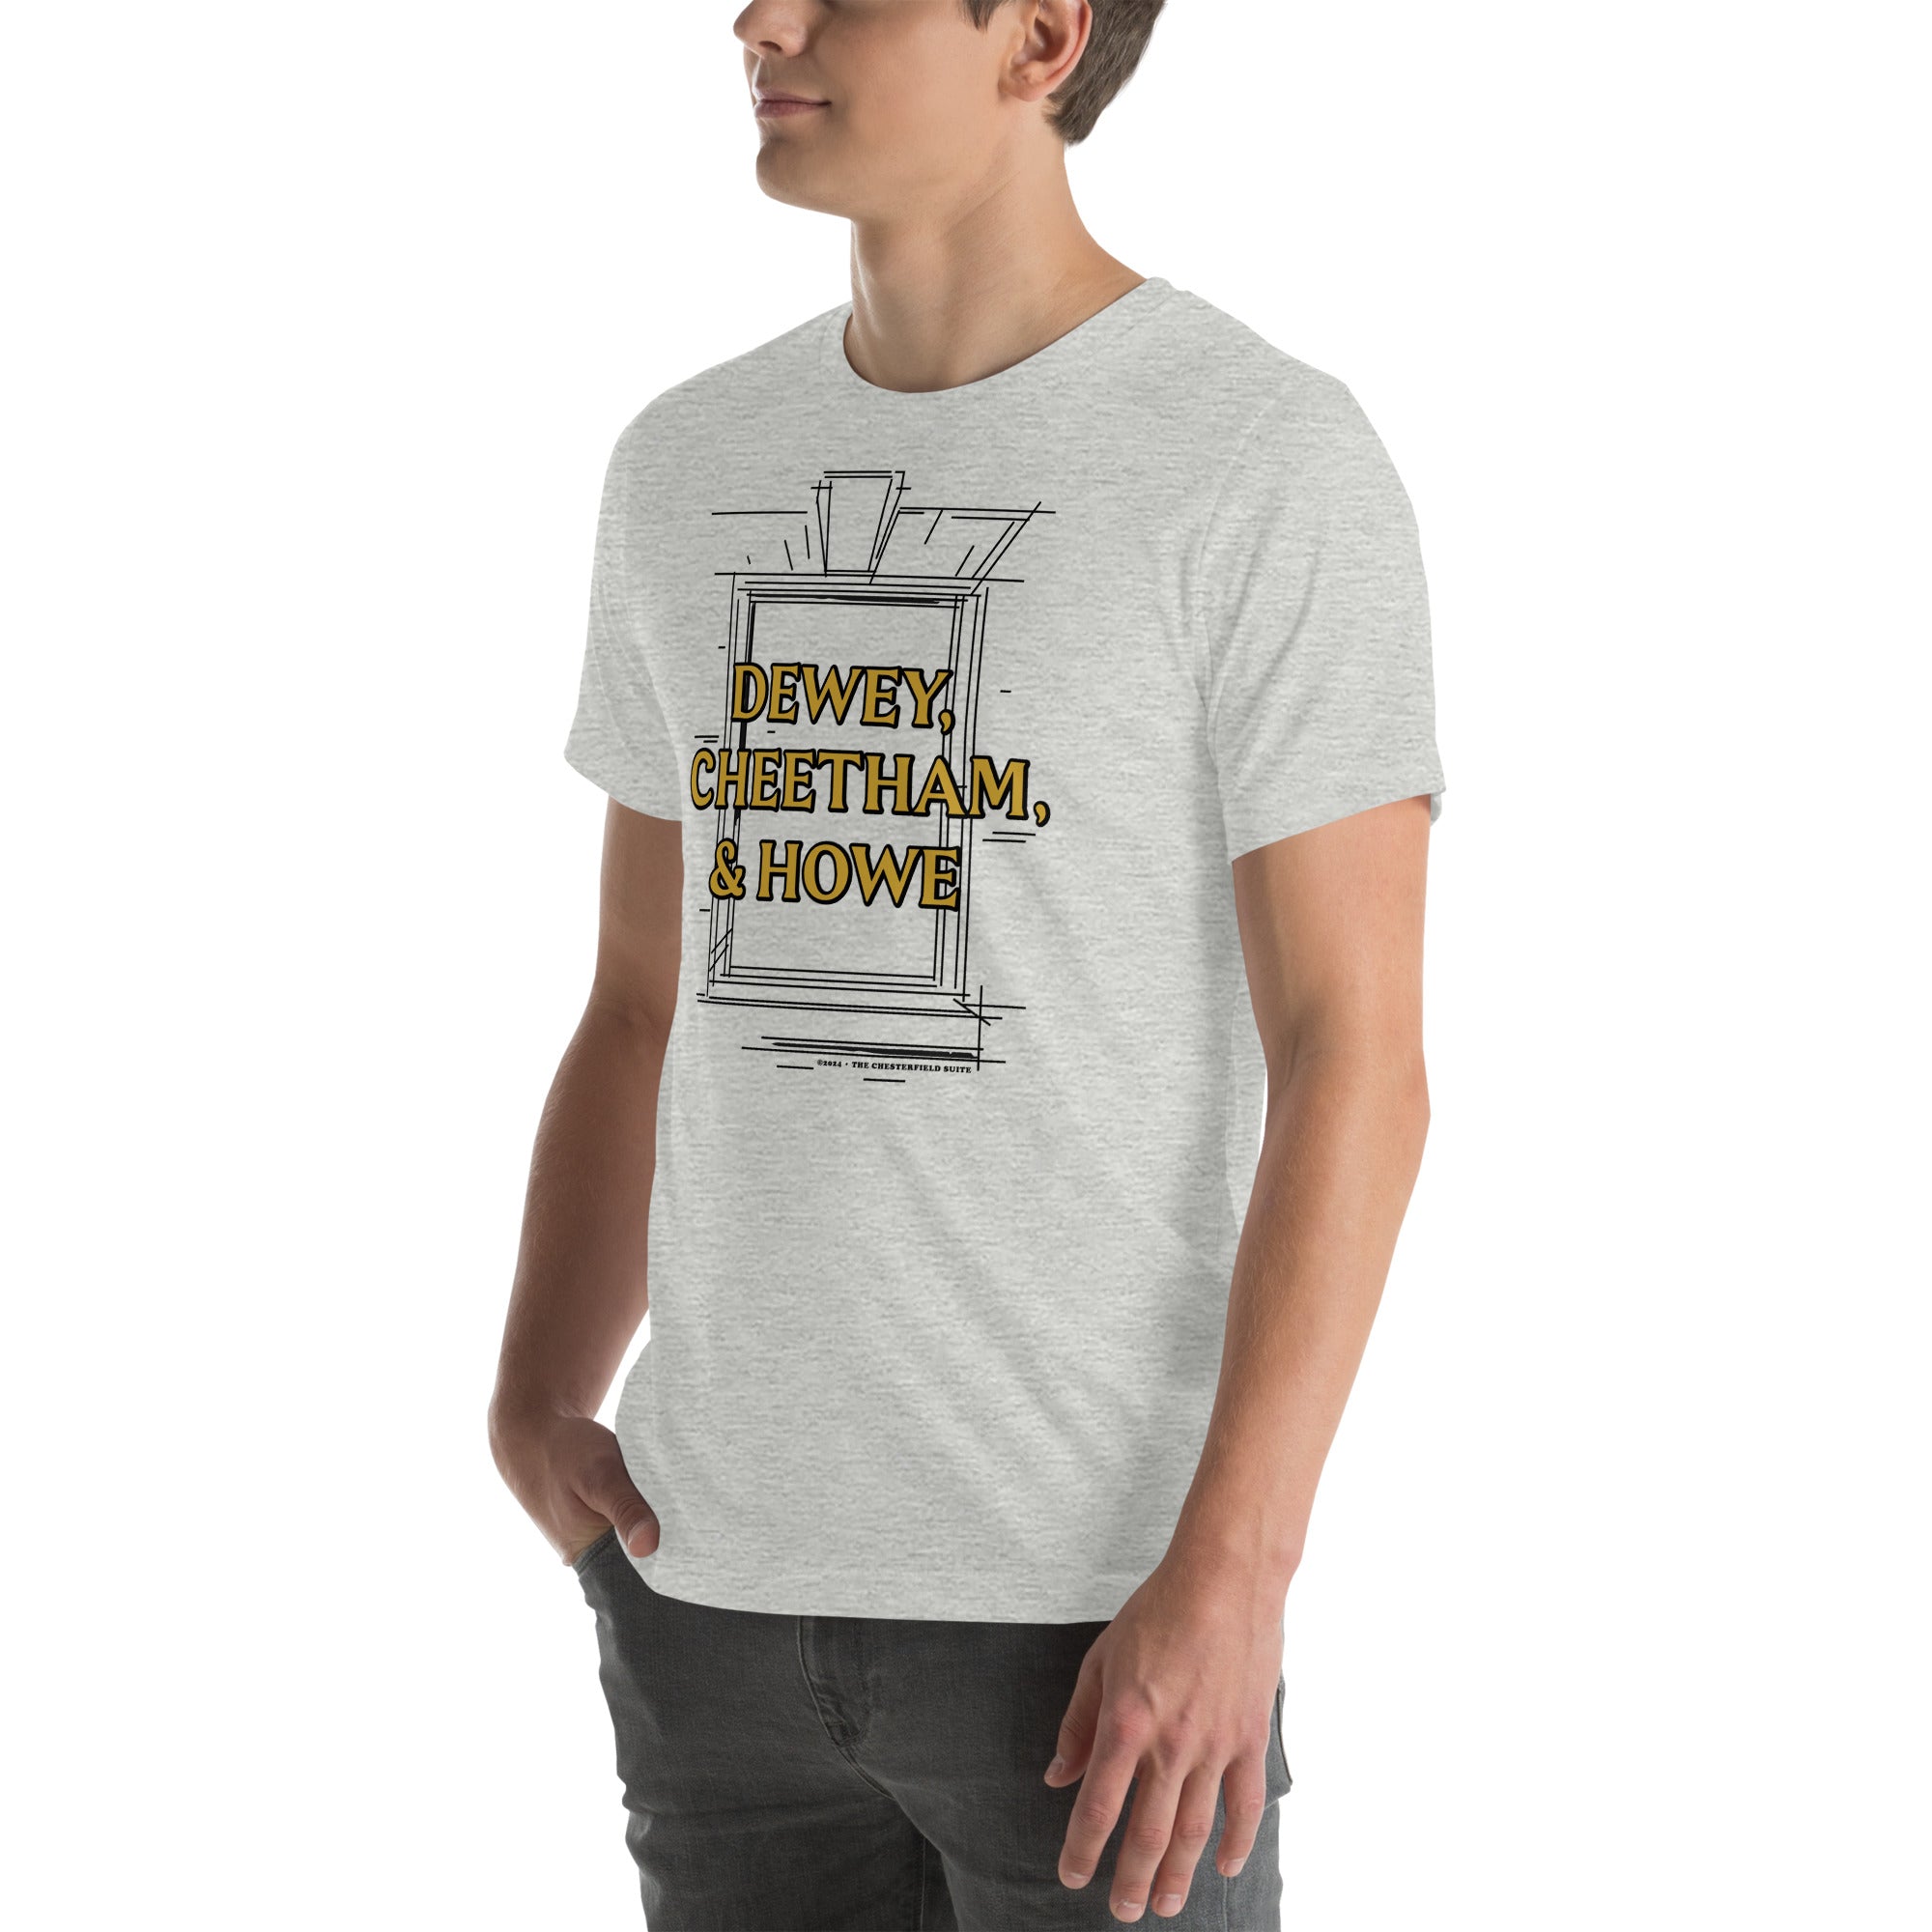 man wearing Light grey unisex t-shirt with Dewey Cheetham & Howe from Harvard square written on in gold